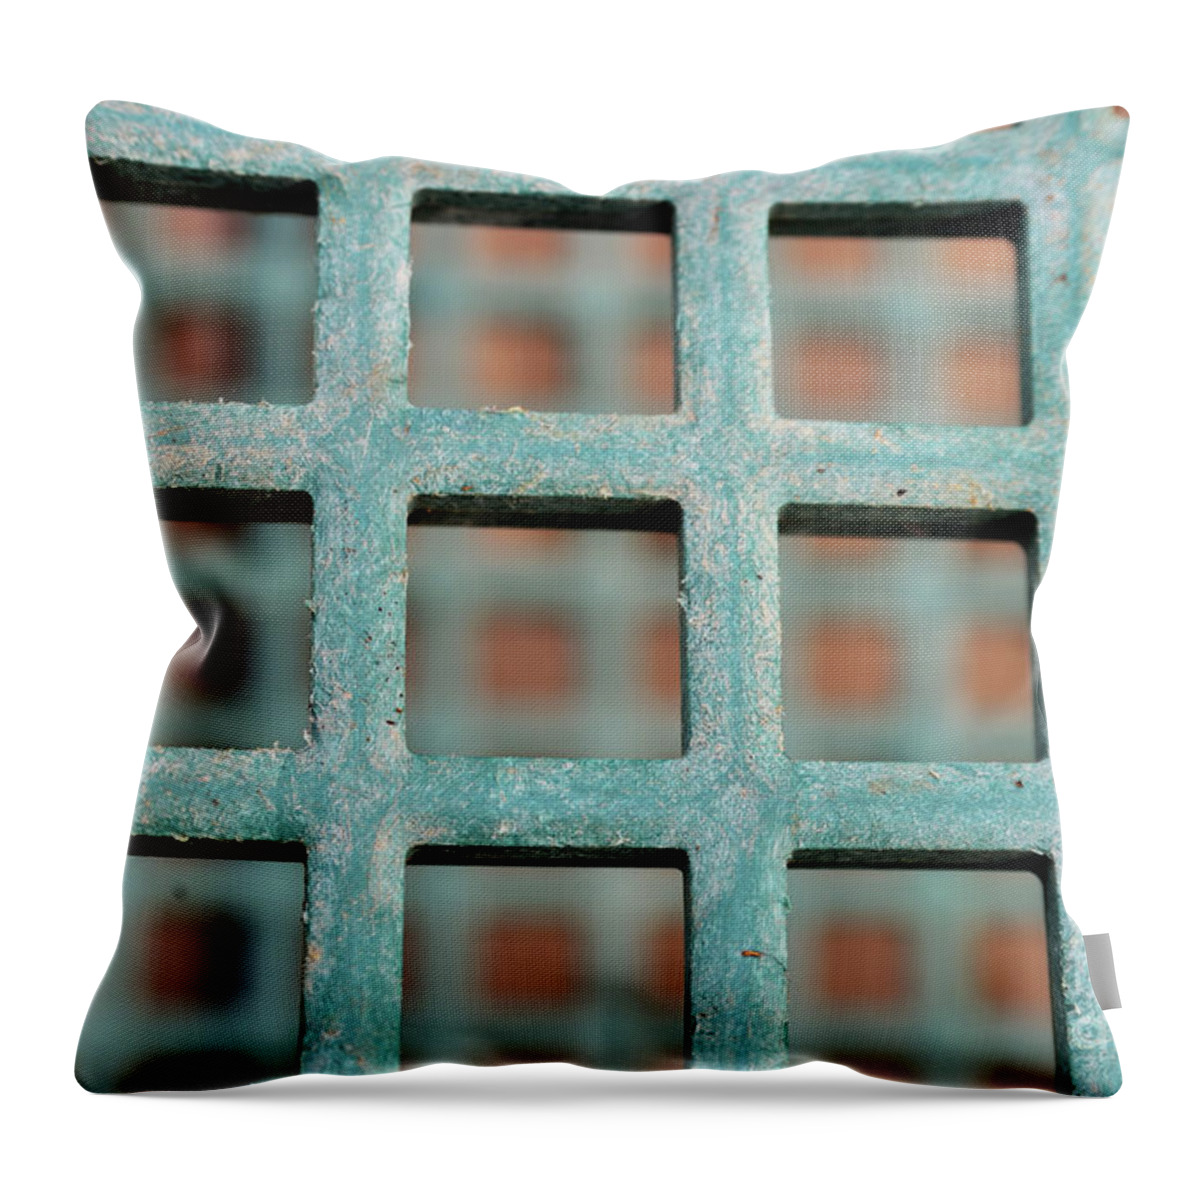 Square Throw Pillow featuring the photograph Small Square Spaces by Kae Cheatham